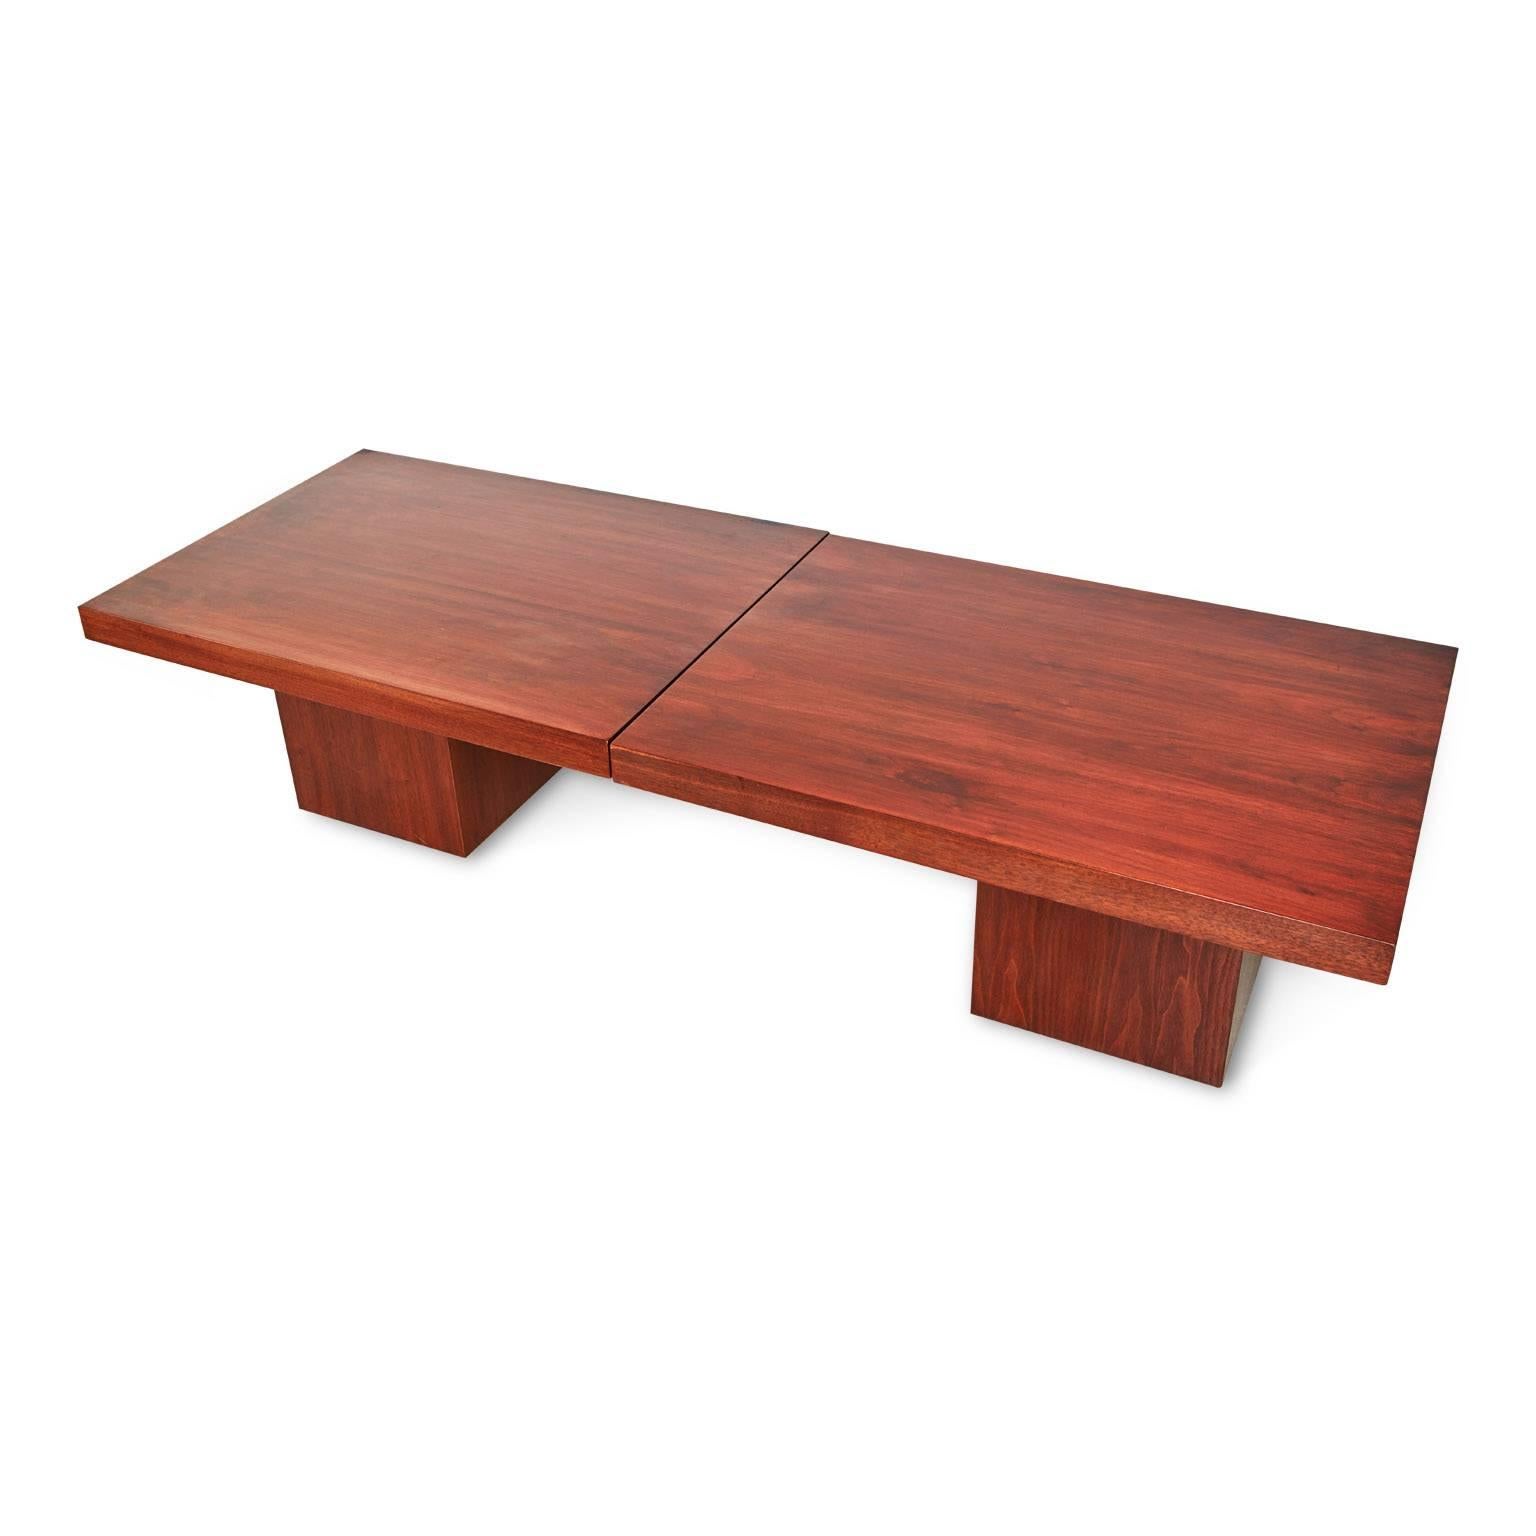 Innovative and versatile extending walnut coffee table designed by John Keal for Brown Saltman which cleverly expands to reveal a black laminate surface top, perfect to accommodate excess guests at gatherings. Fabricated from warm-hued walnut with